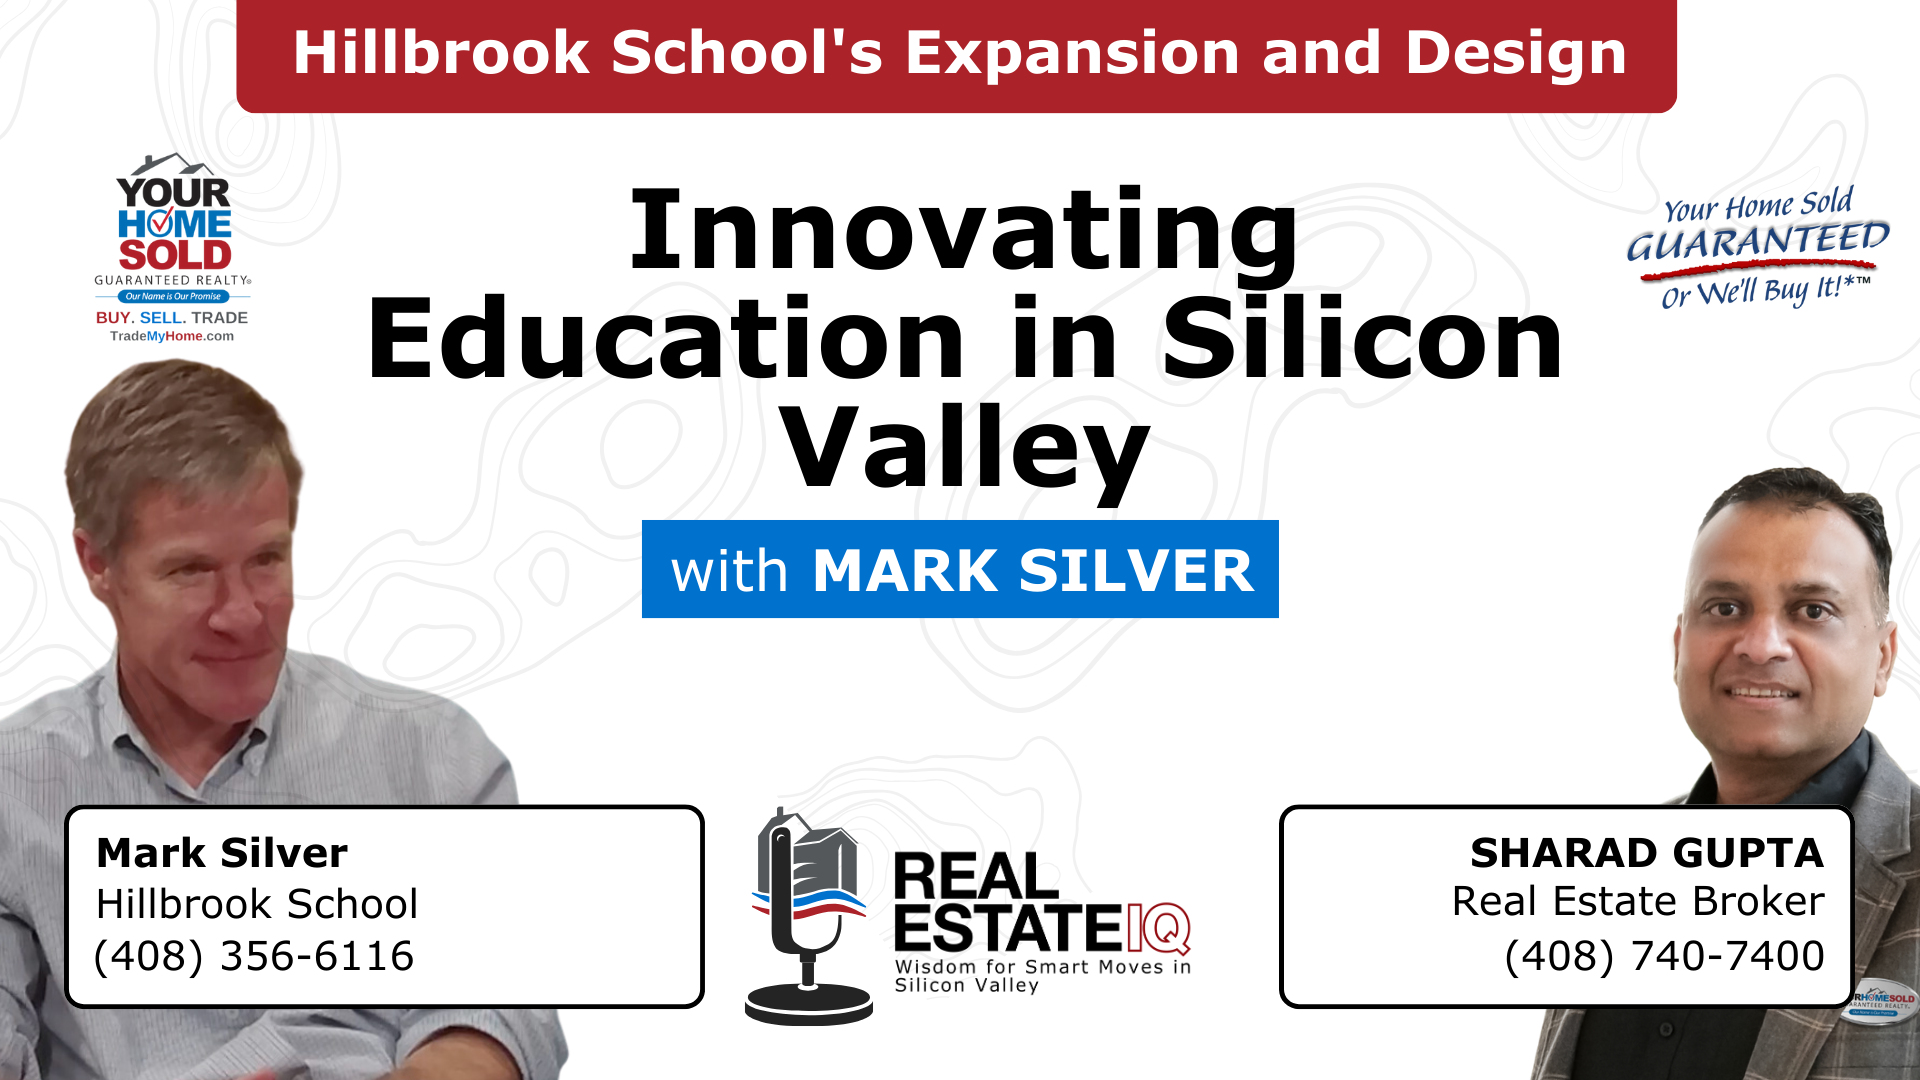 Innovating Education: Hillbrook School’s Expansion and Design in Silicon Valley Video